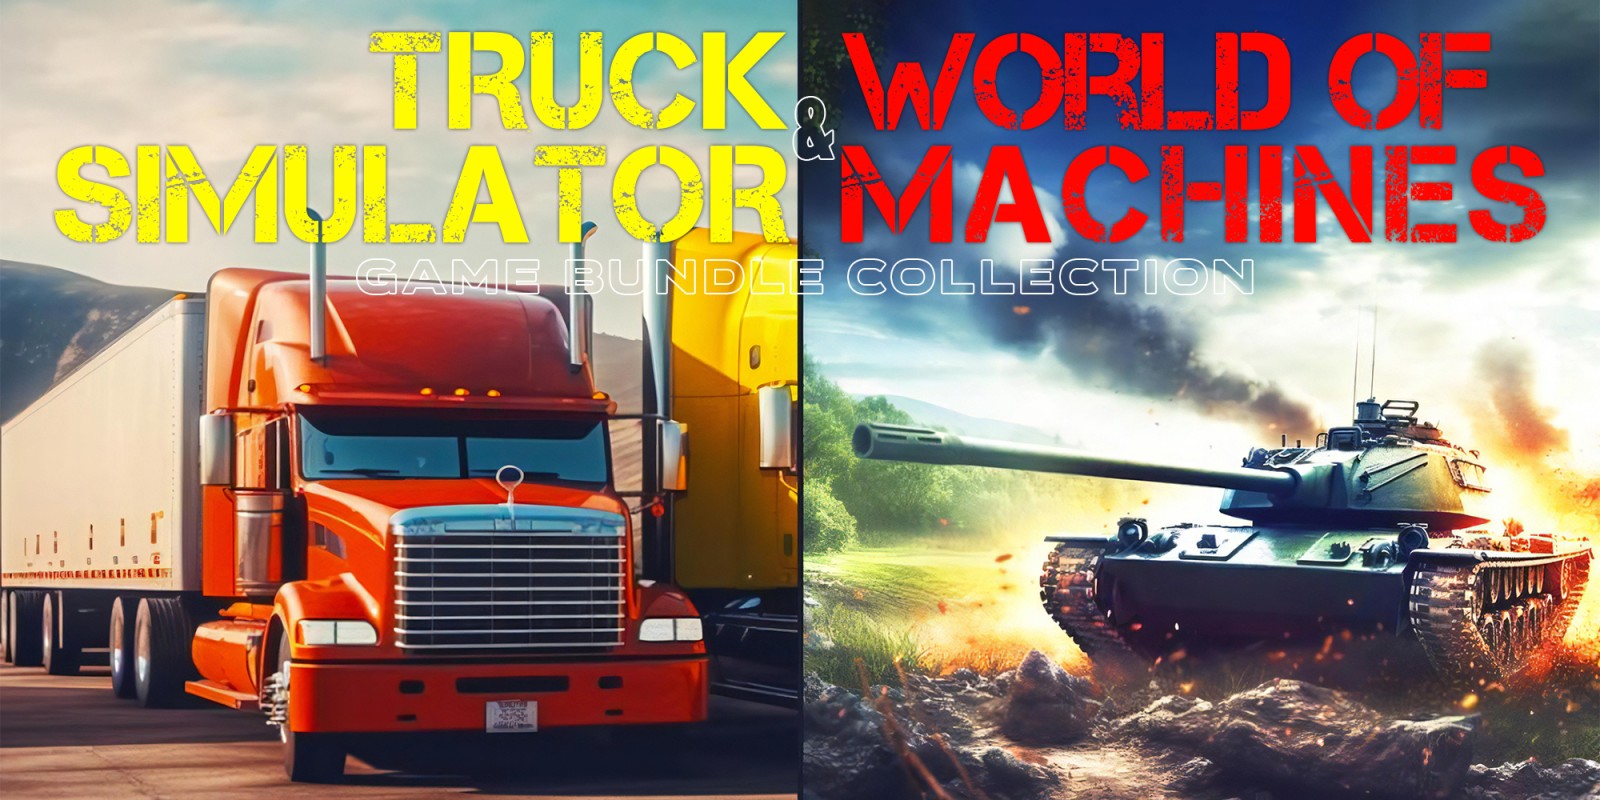 Truck Simulator & World of Machines Game Bundle Collection | Jeux à ...